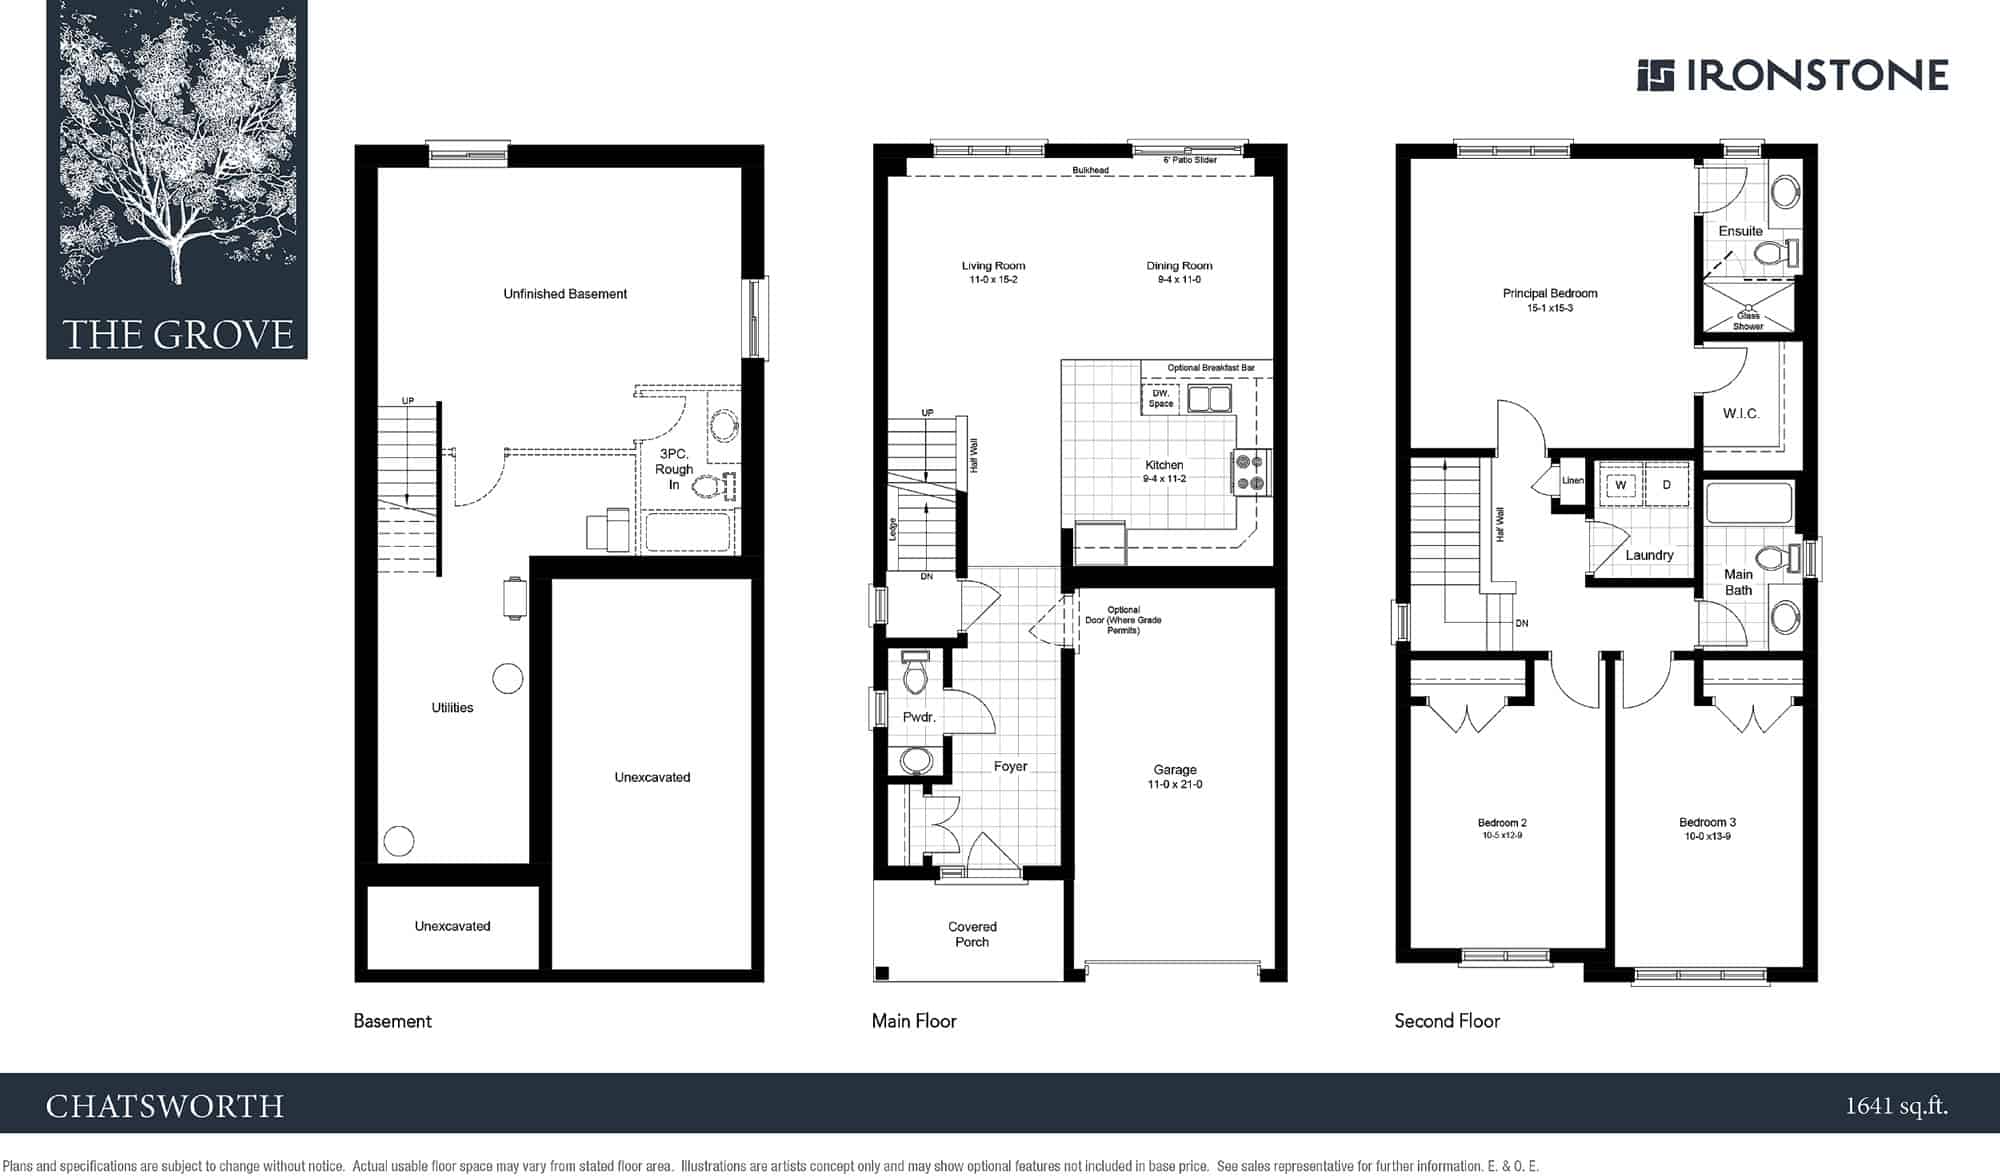  38 Julie Crescent  Floor Plan of  The Grove with undefined beds